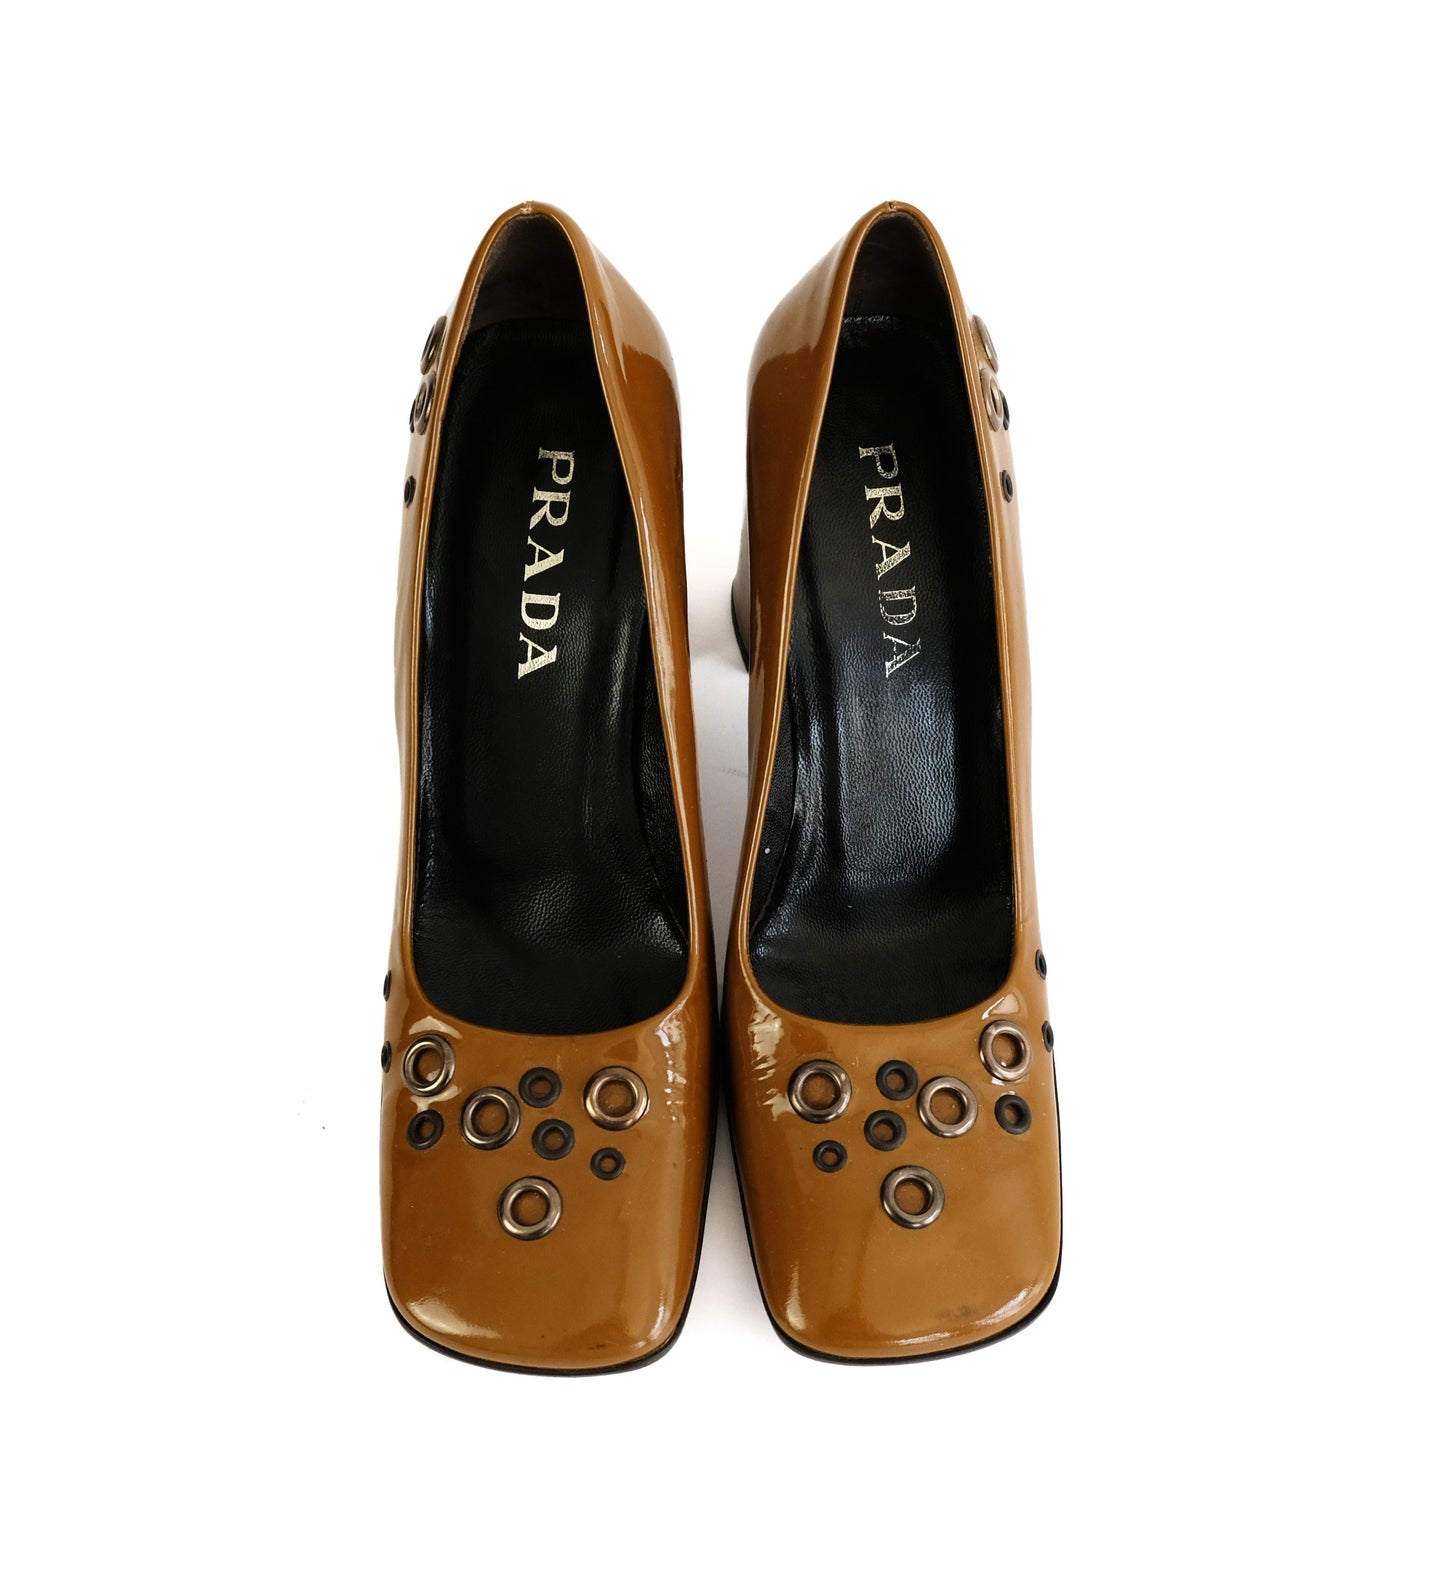 Prada High Heel Shoes in Brown Patent Leather with Rivets, EU38.5